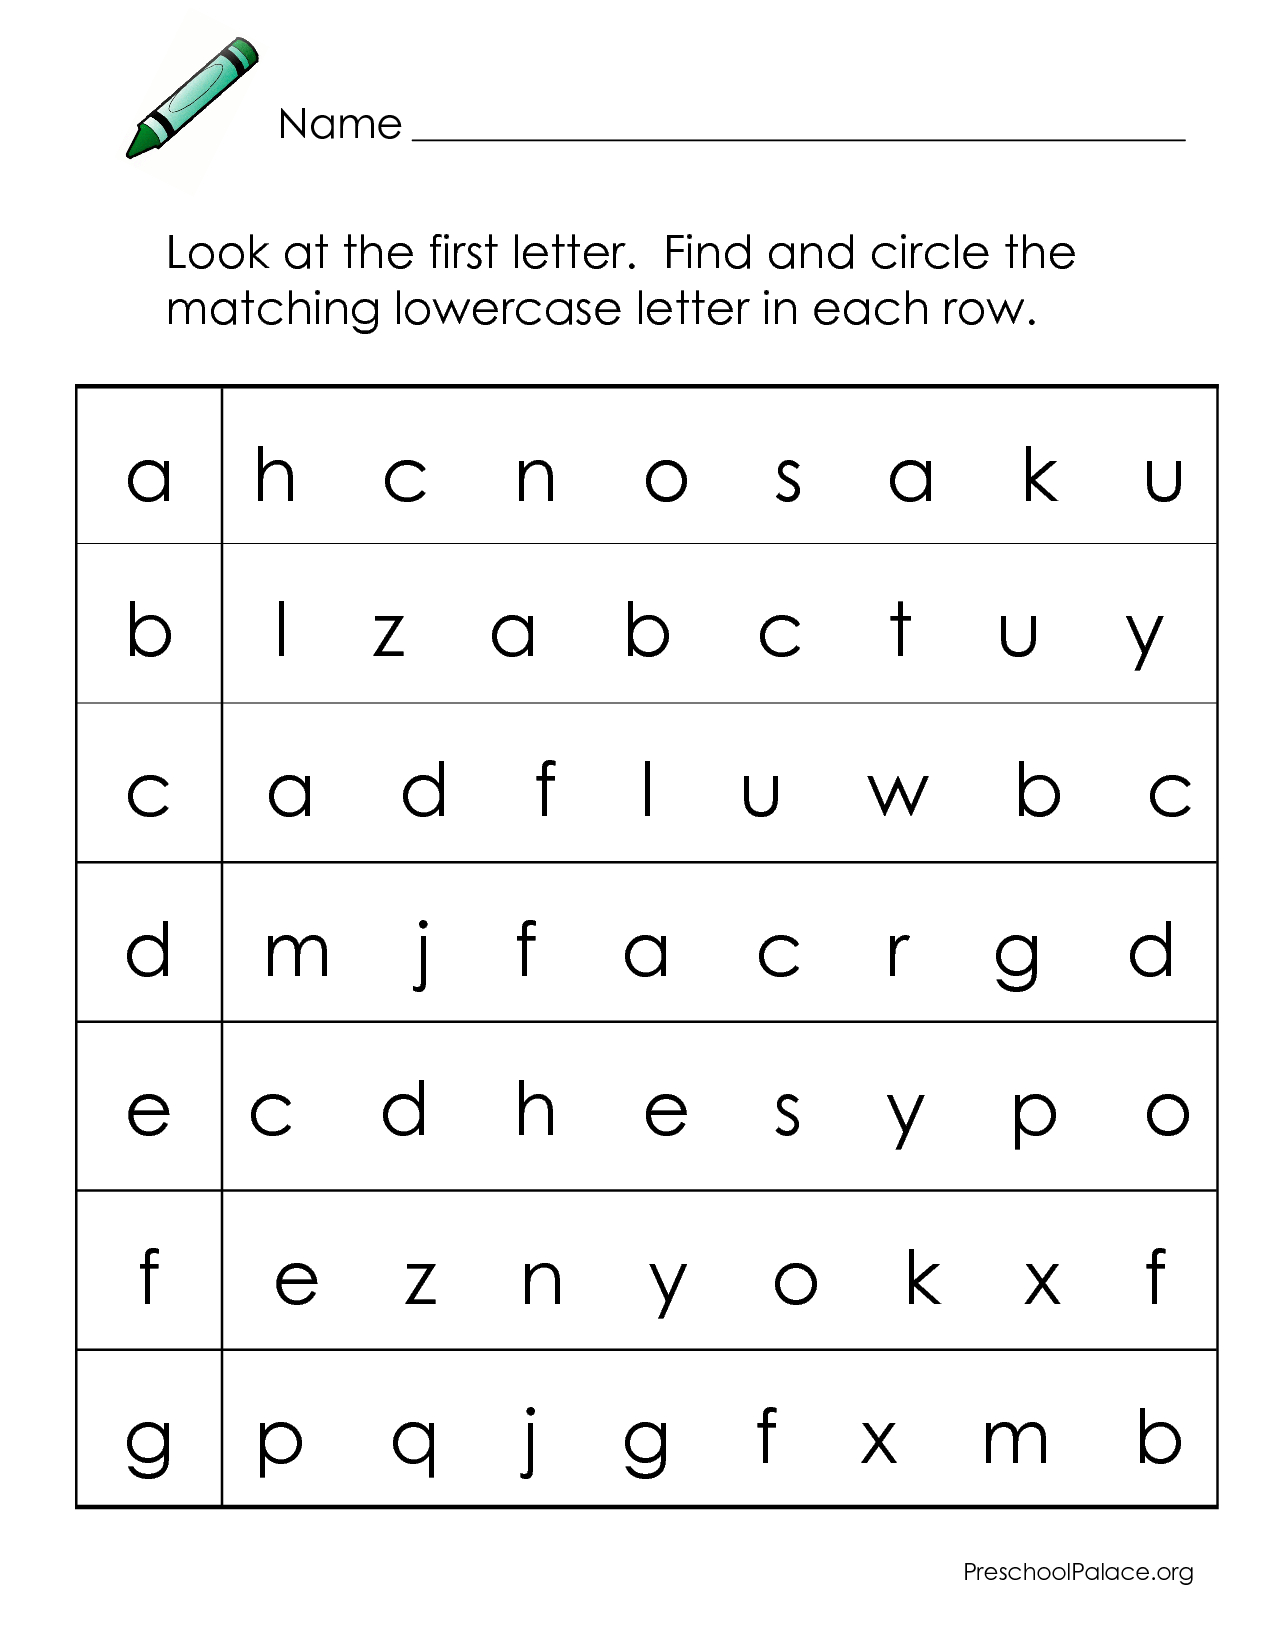 Alphabet Worksheets For Preschoolers | Abcs - Letter intended for Alphabet Matching Worksheets With Pictures